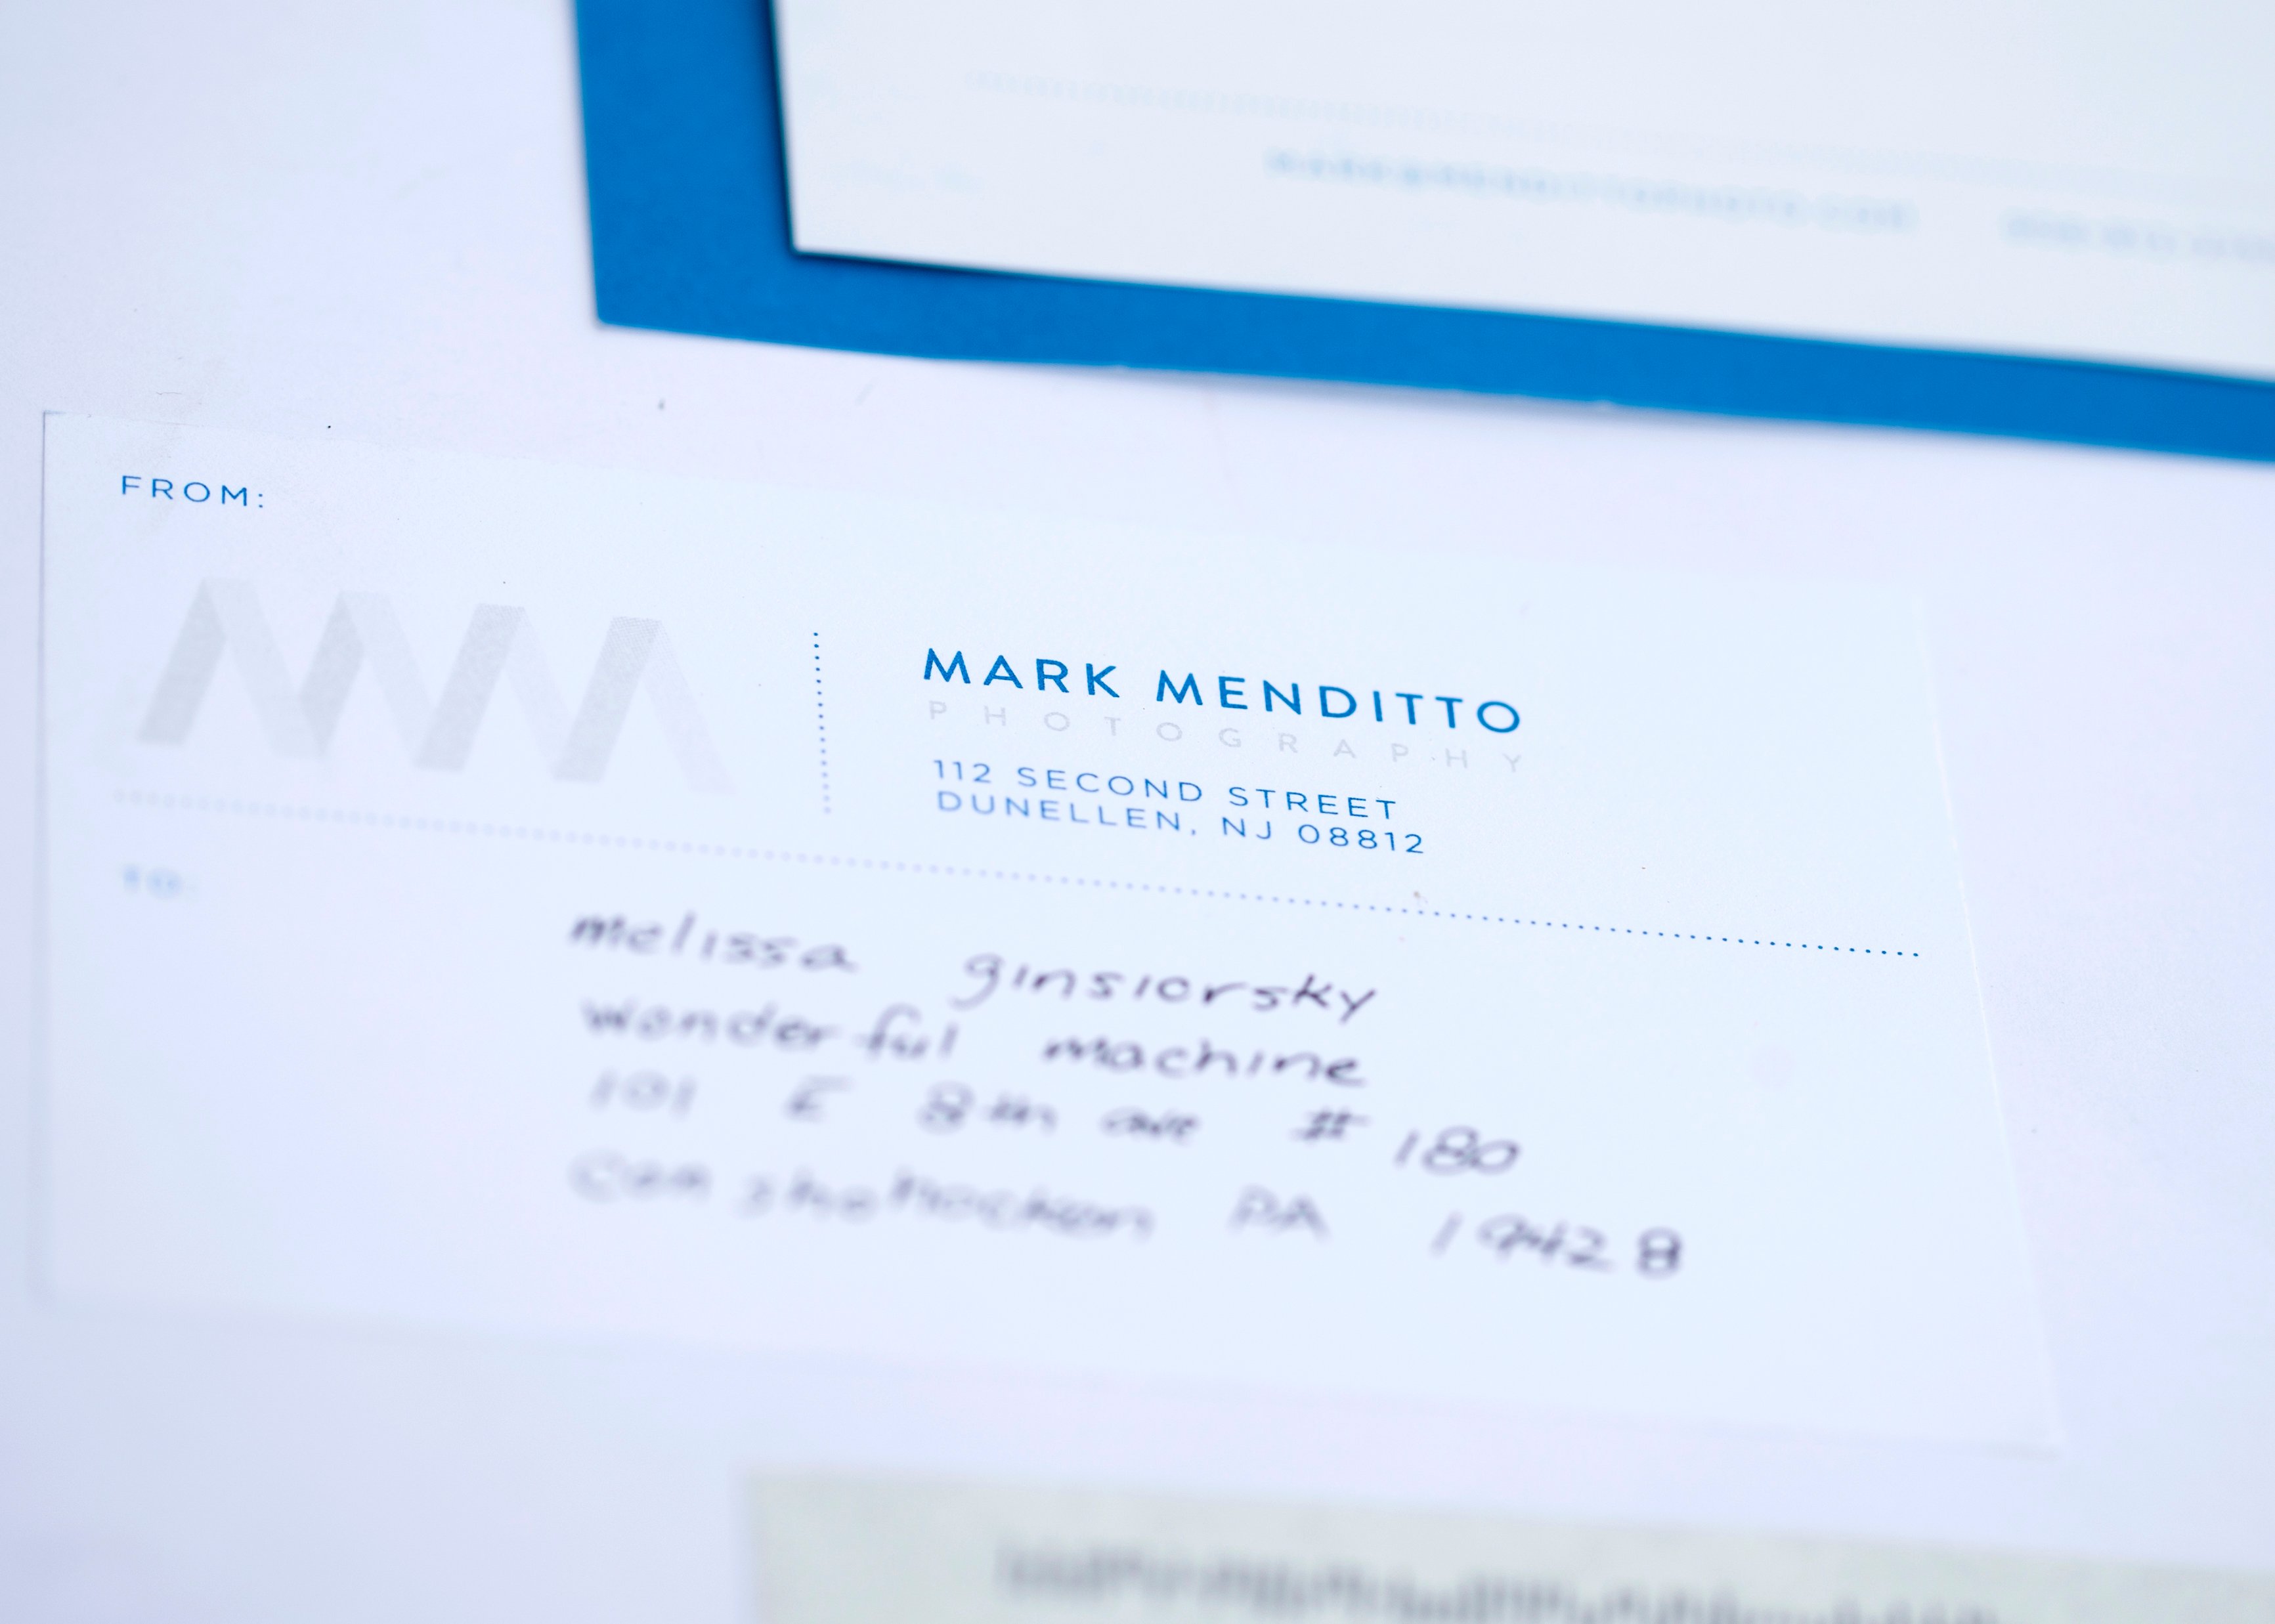 Mark Menditto's note to Wonderful Machine featuring some of his fantastic letter-pressed stationery.